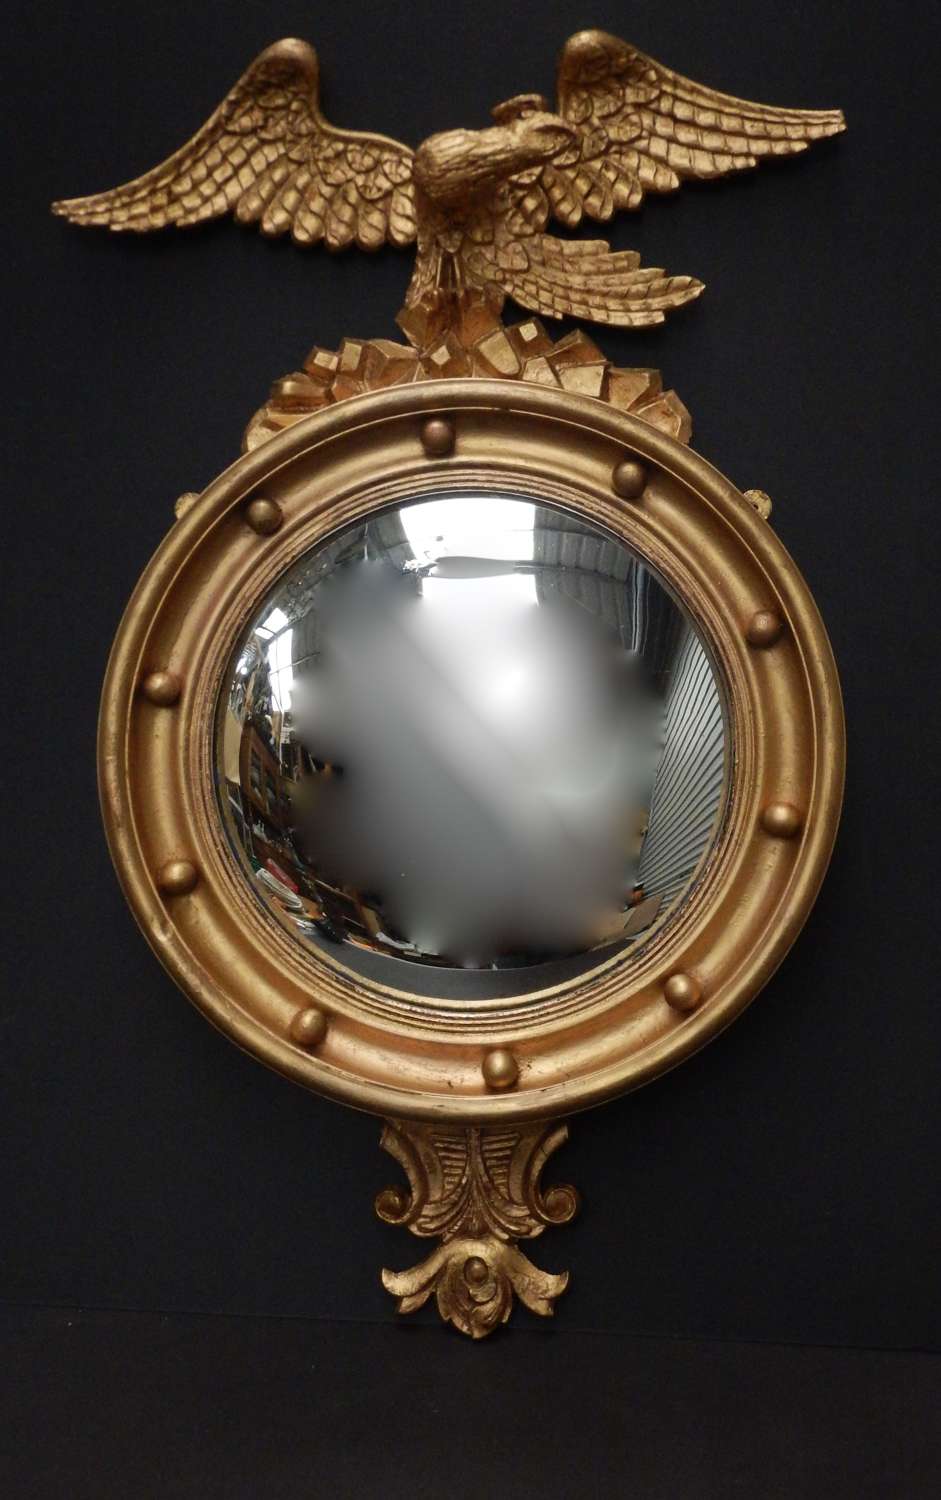 Antique French Convex Mirror with Eagle in the Imperial Style - Superb